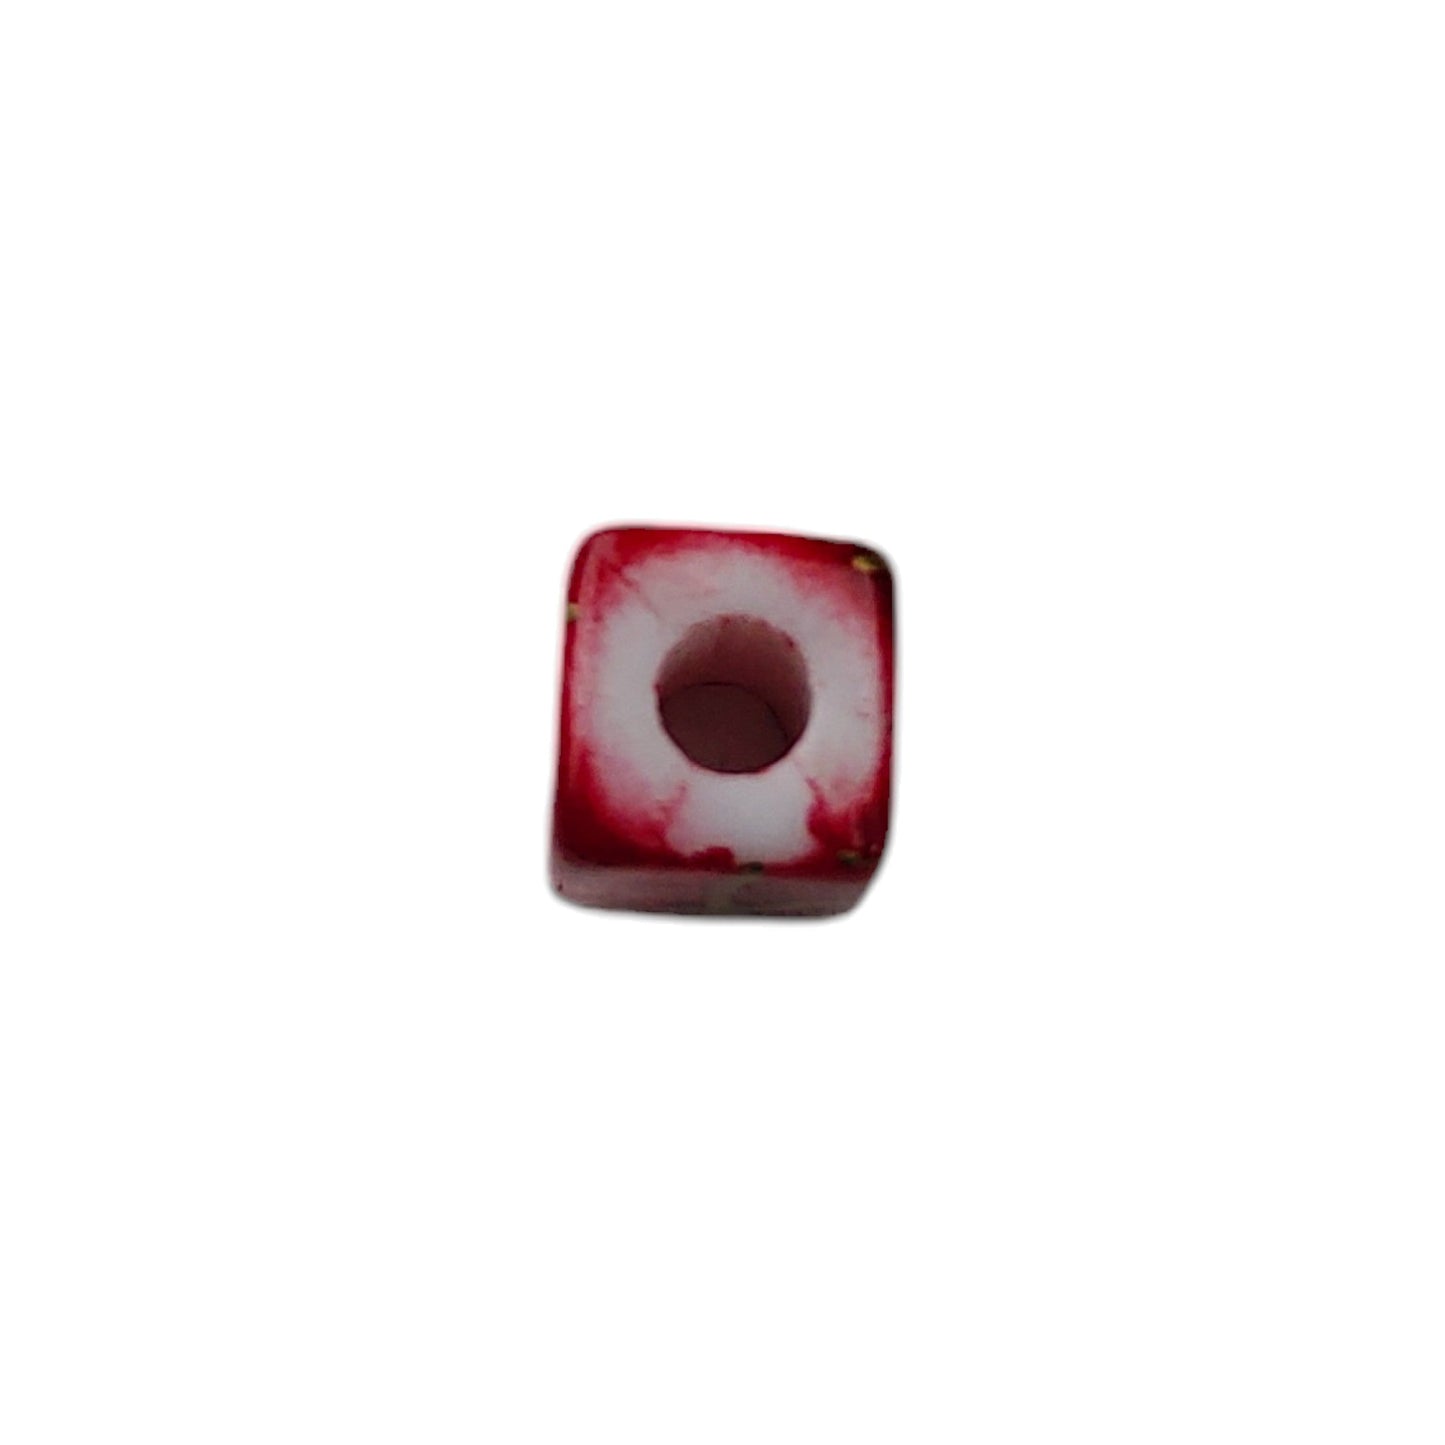 Square Shape Designer Colored Motif Beads For Craft or décor -11701